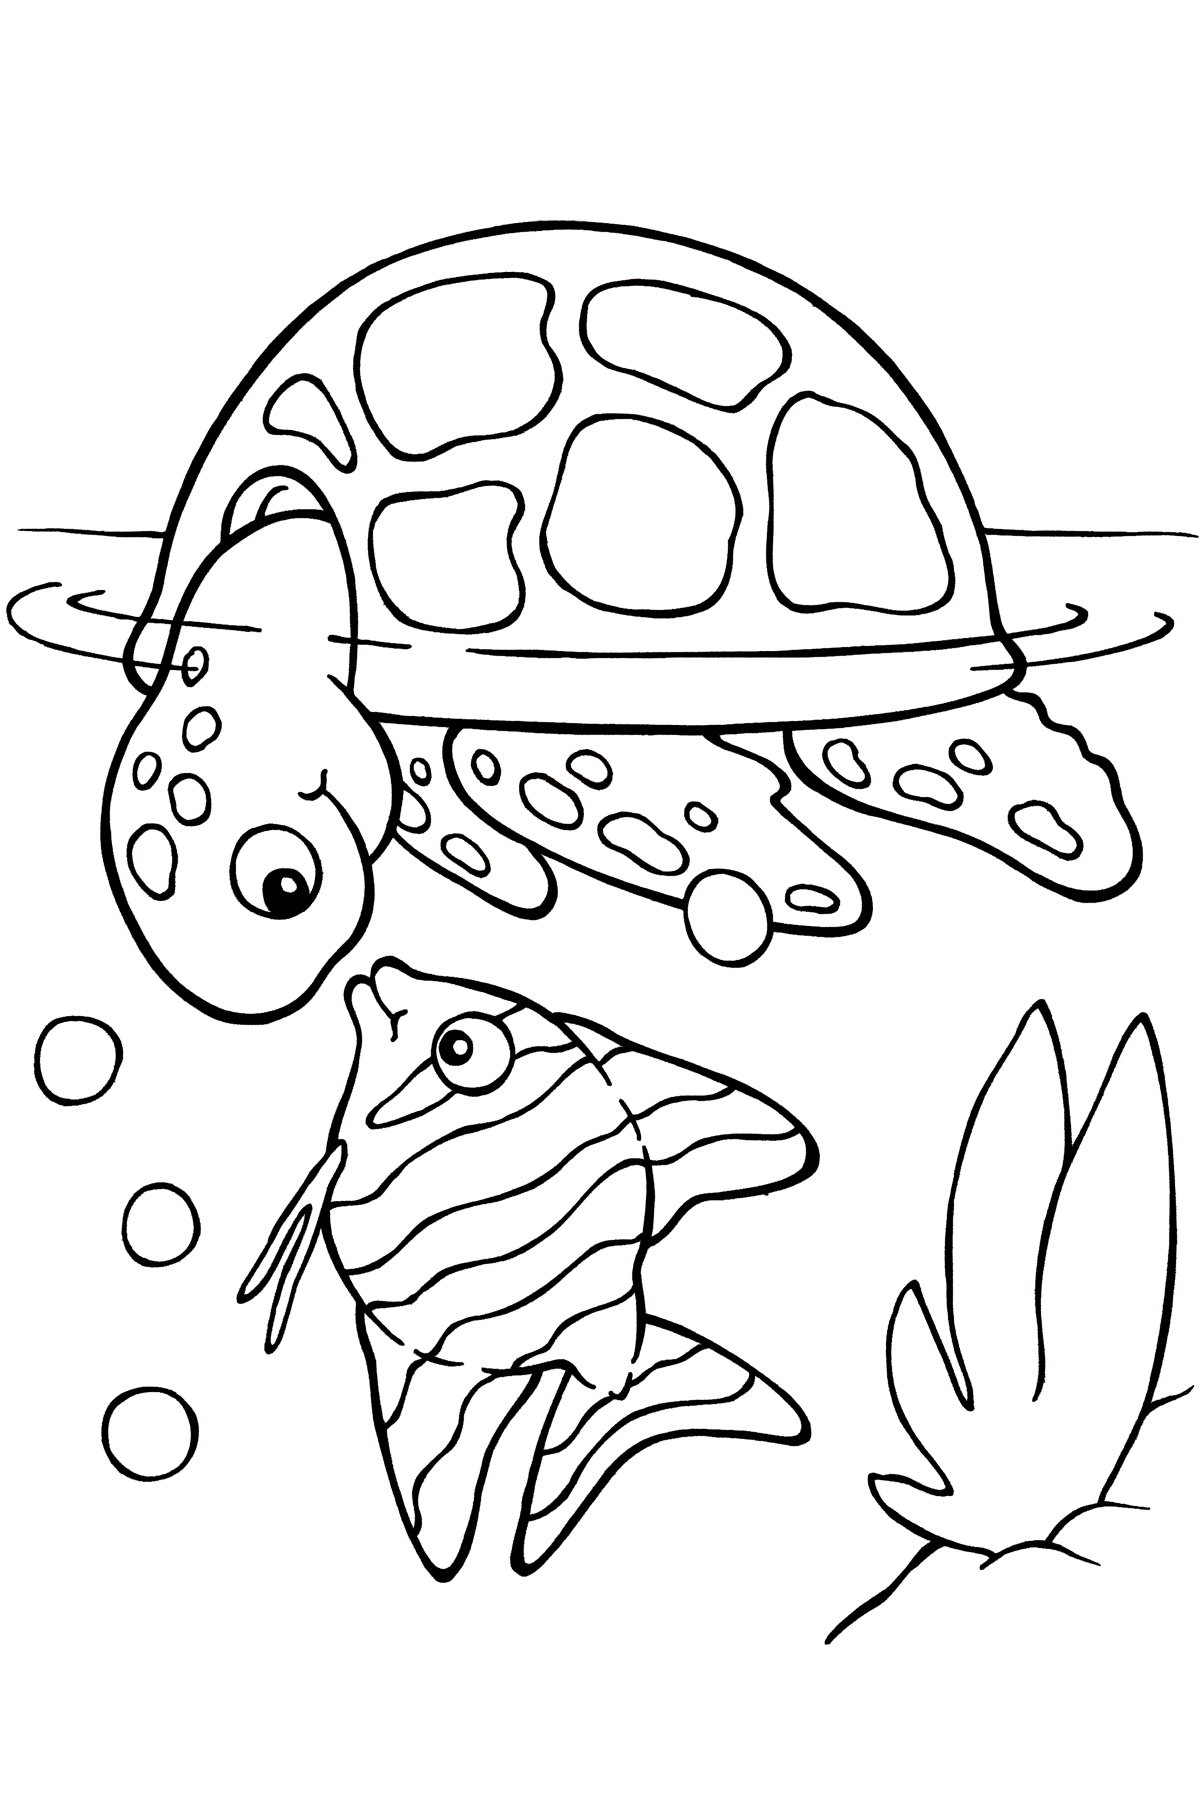 Turtle And Fish Line Art by SASGraphics on Clipart library